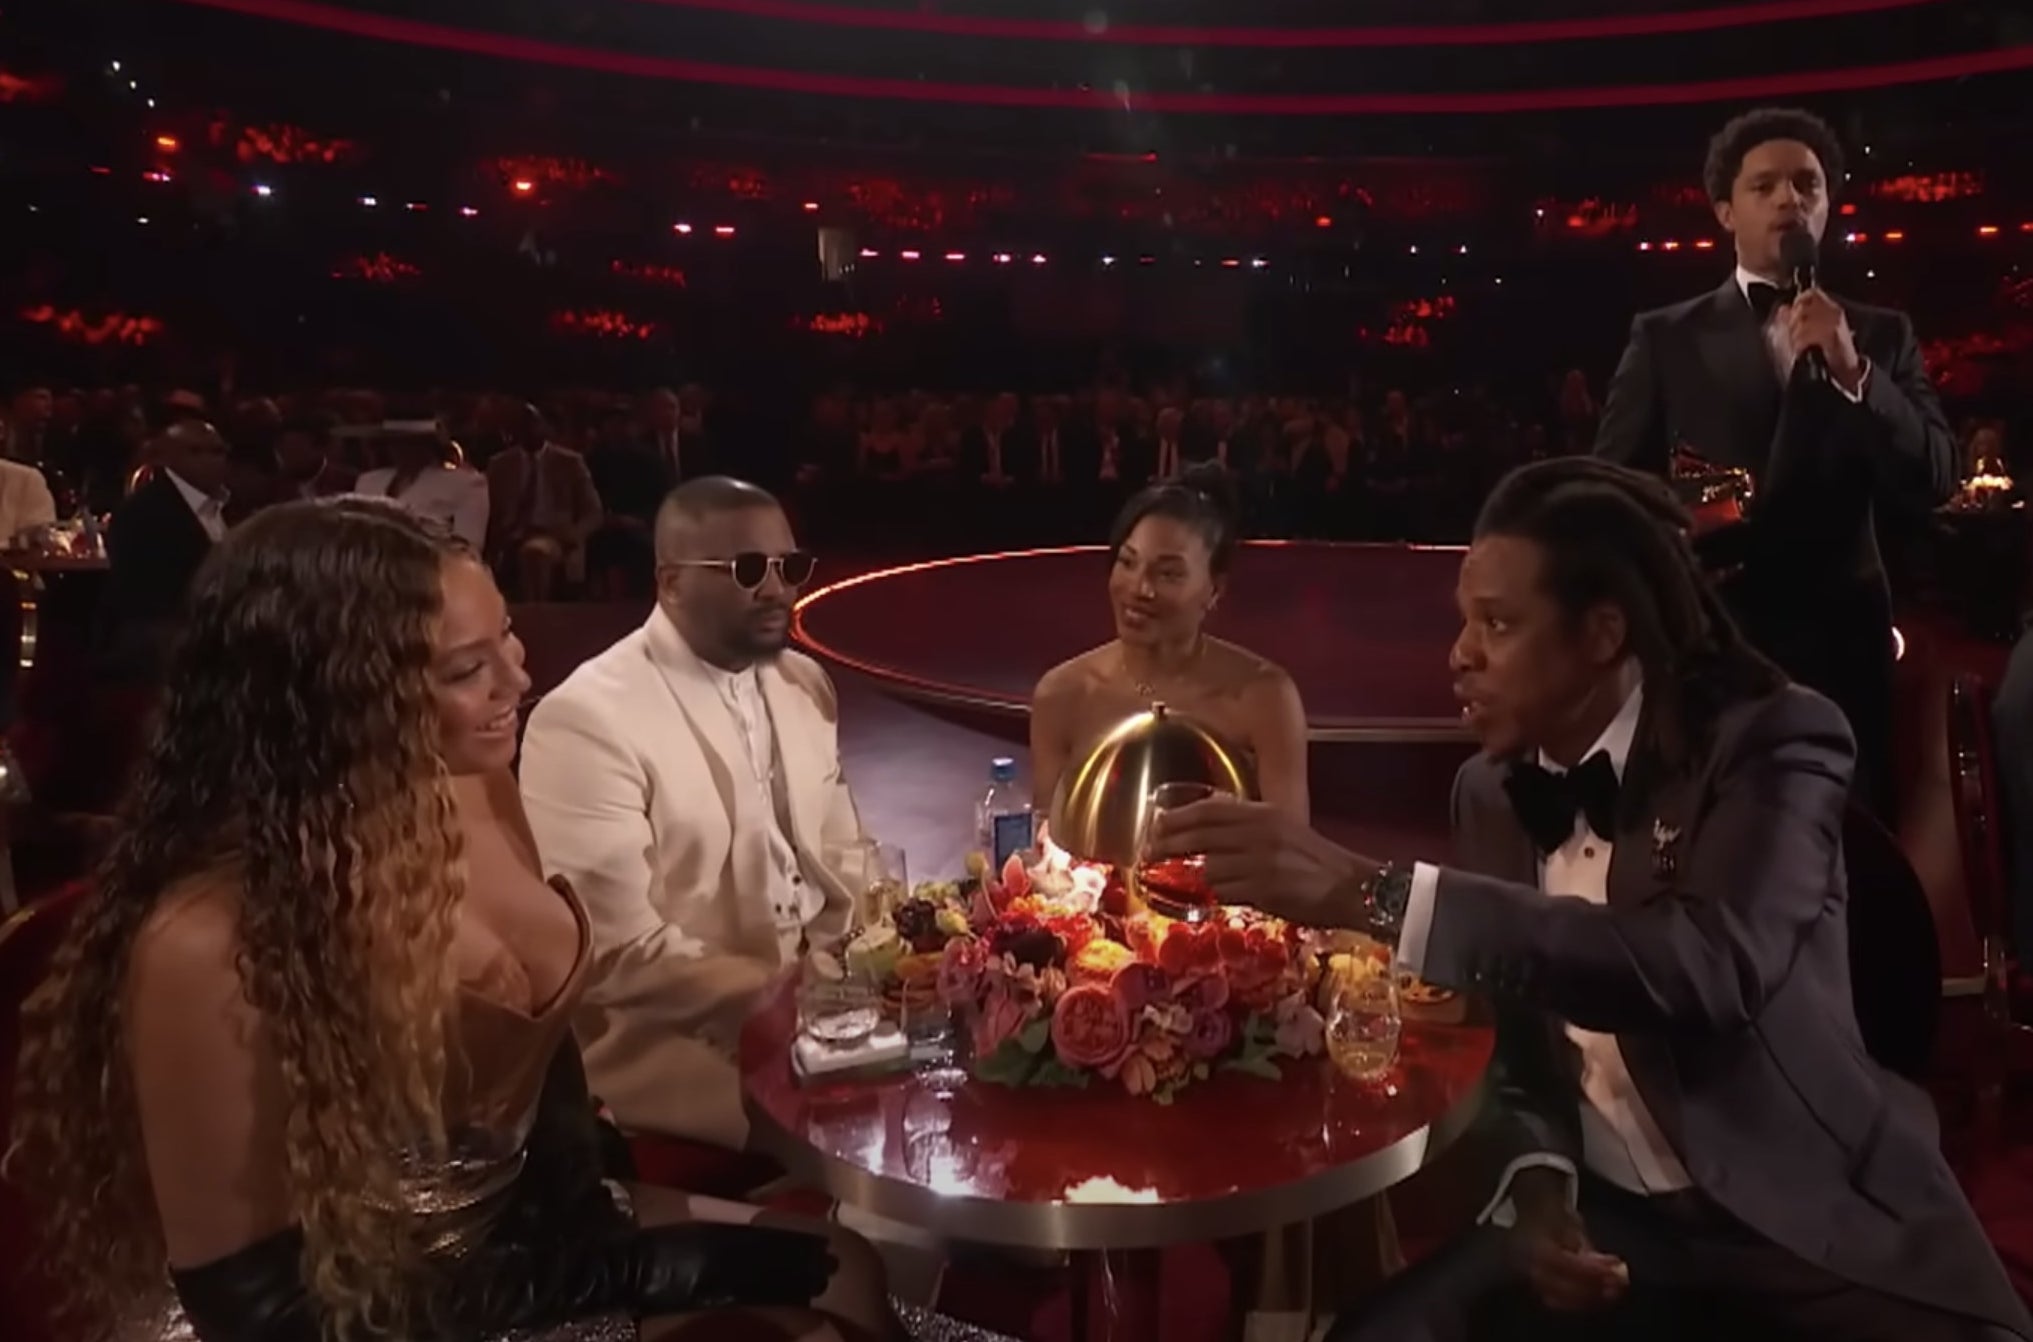 Jay tries to pass a small glass to Beyonce